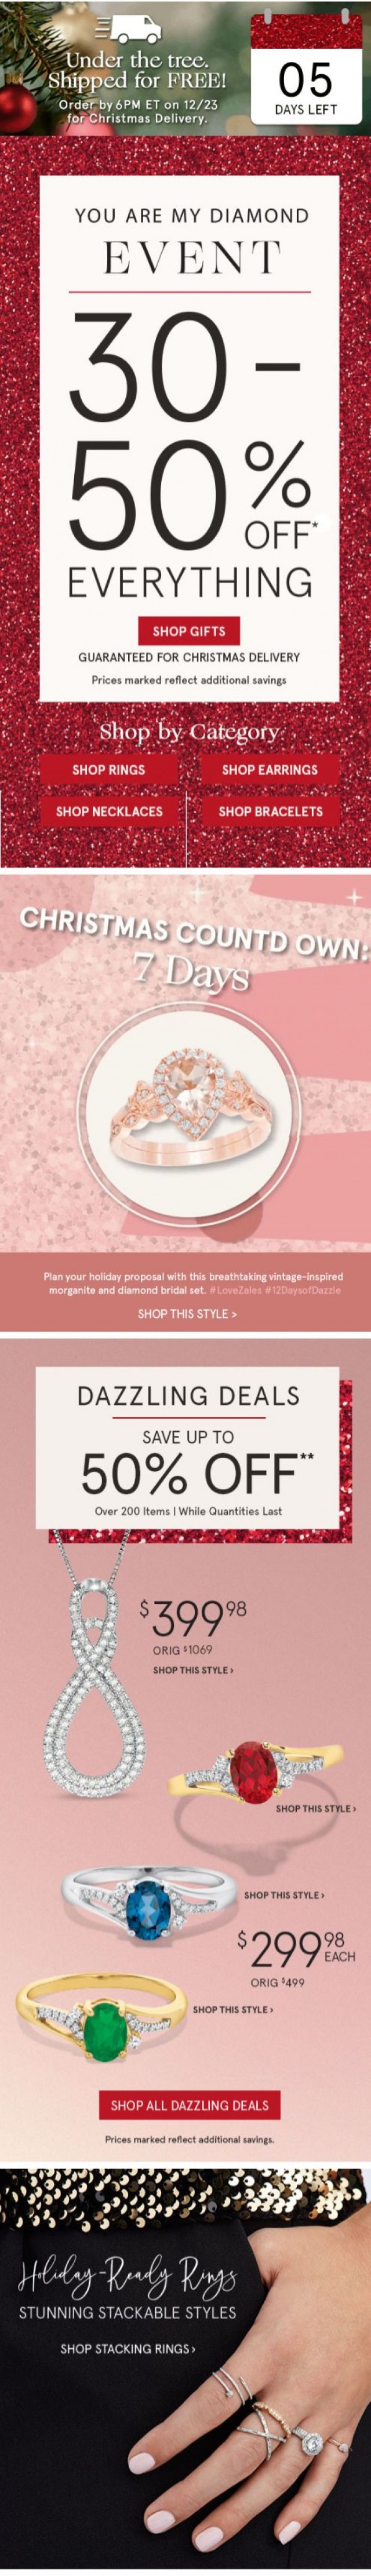 Coupon for: Zales - Dazzle, Delight and Save 30-50% Off EVERYTHING